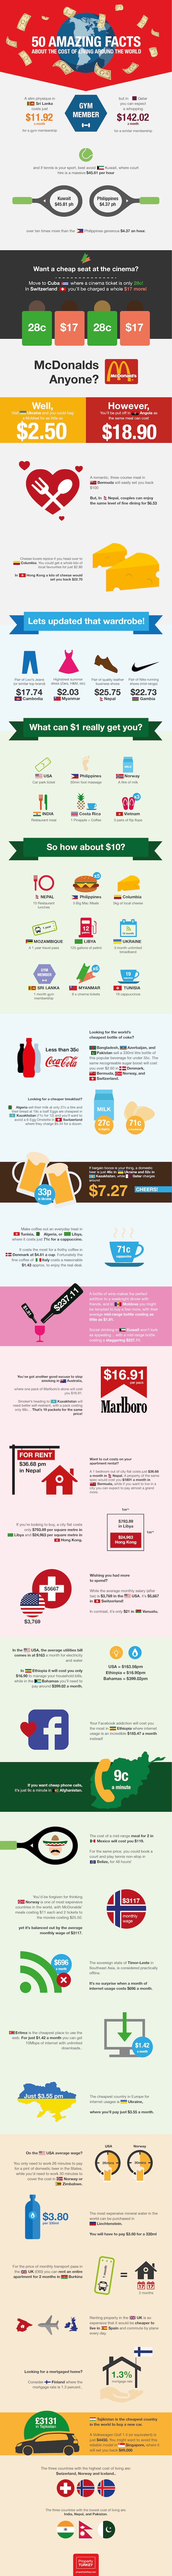 Infographic Cost of Living copy